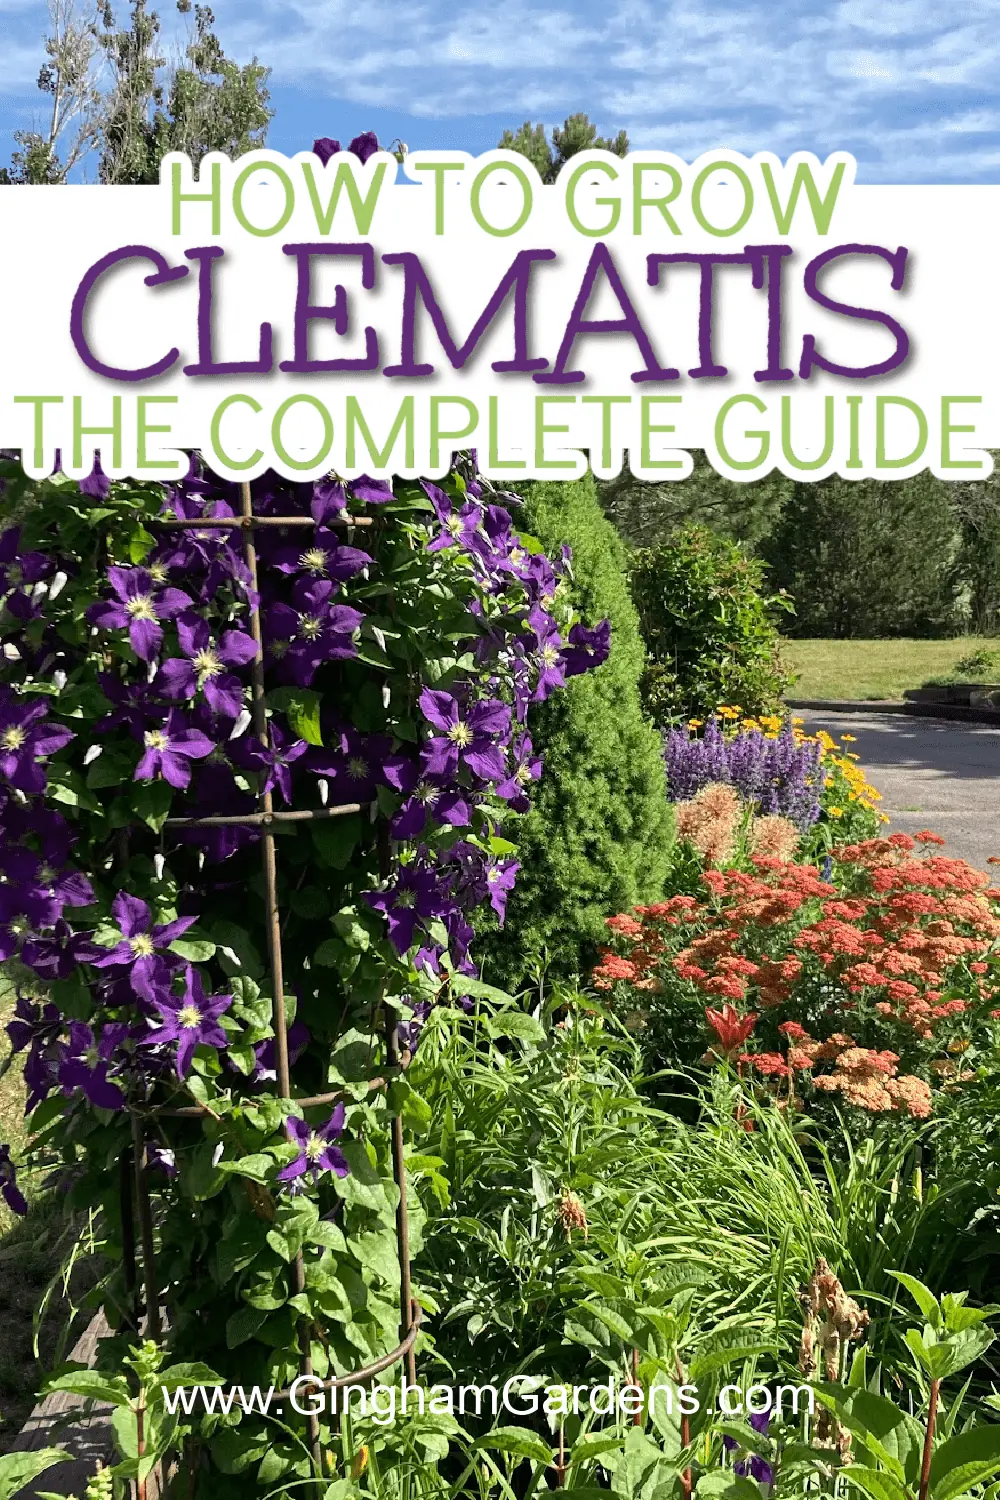 Image of a purple clematis vine in a flower garden with text overlay How to Grow Clematis the complete guide